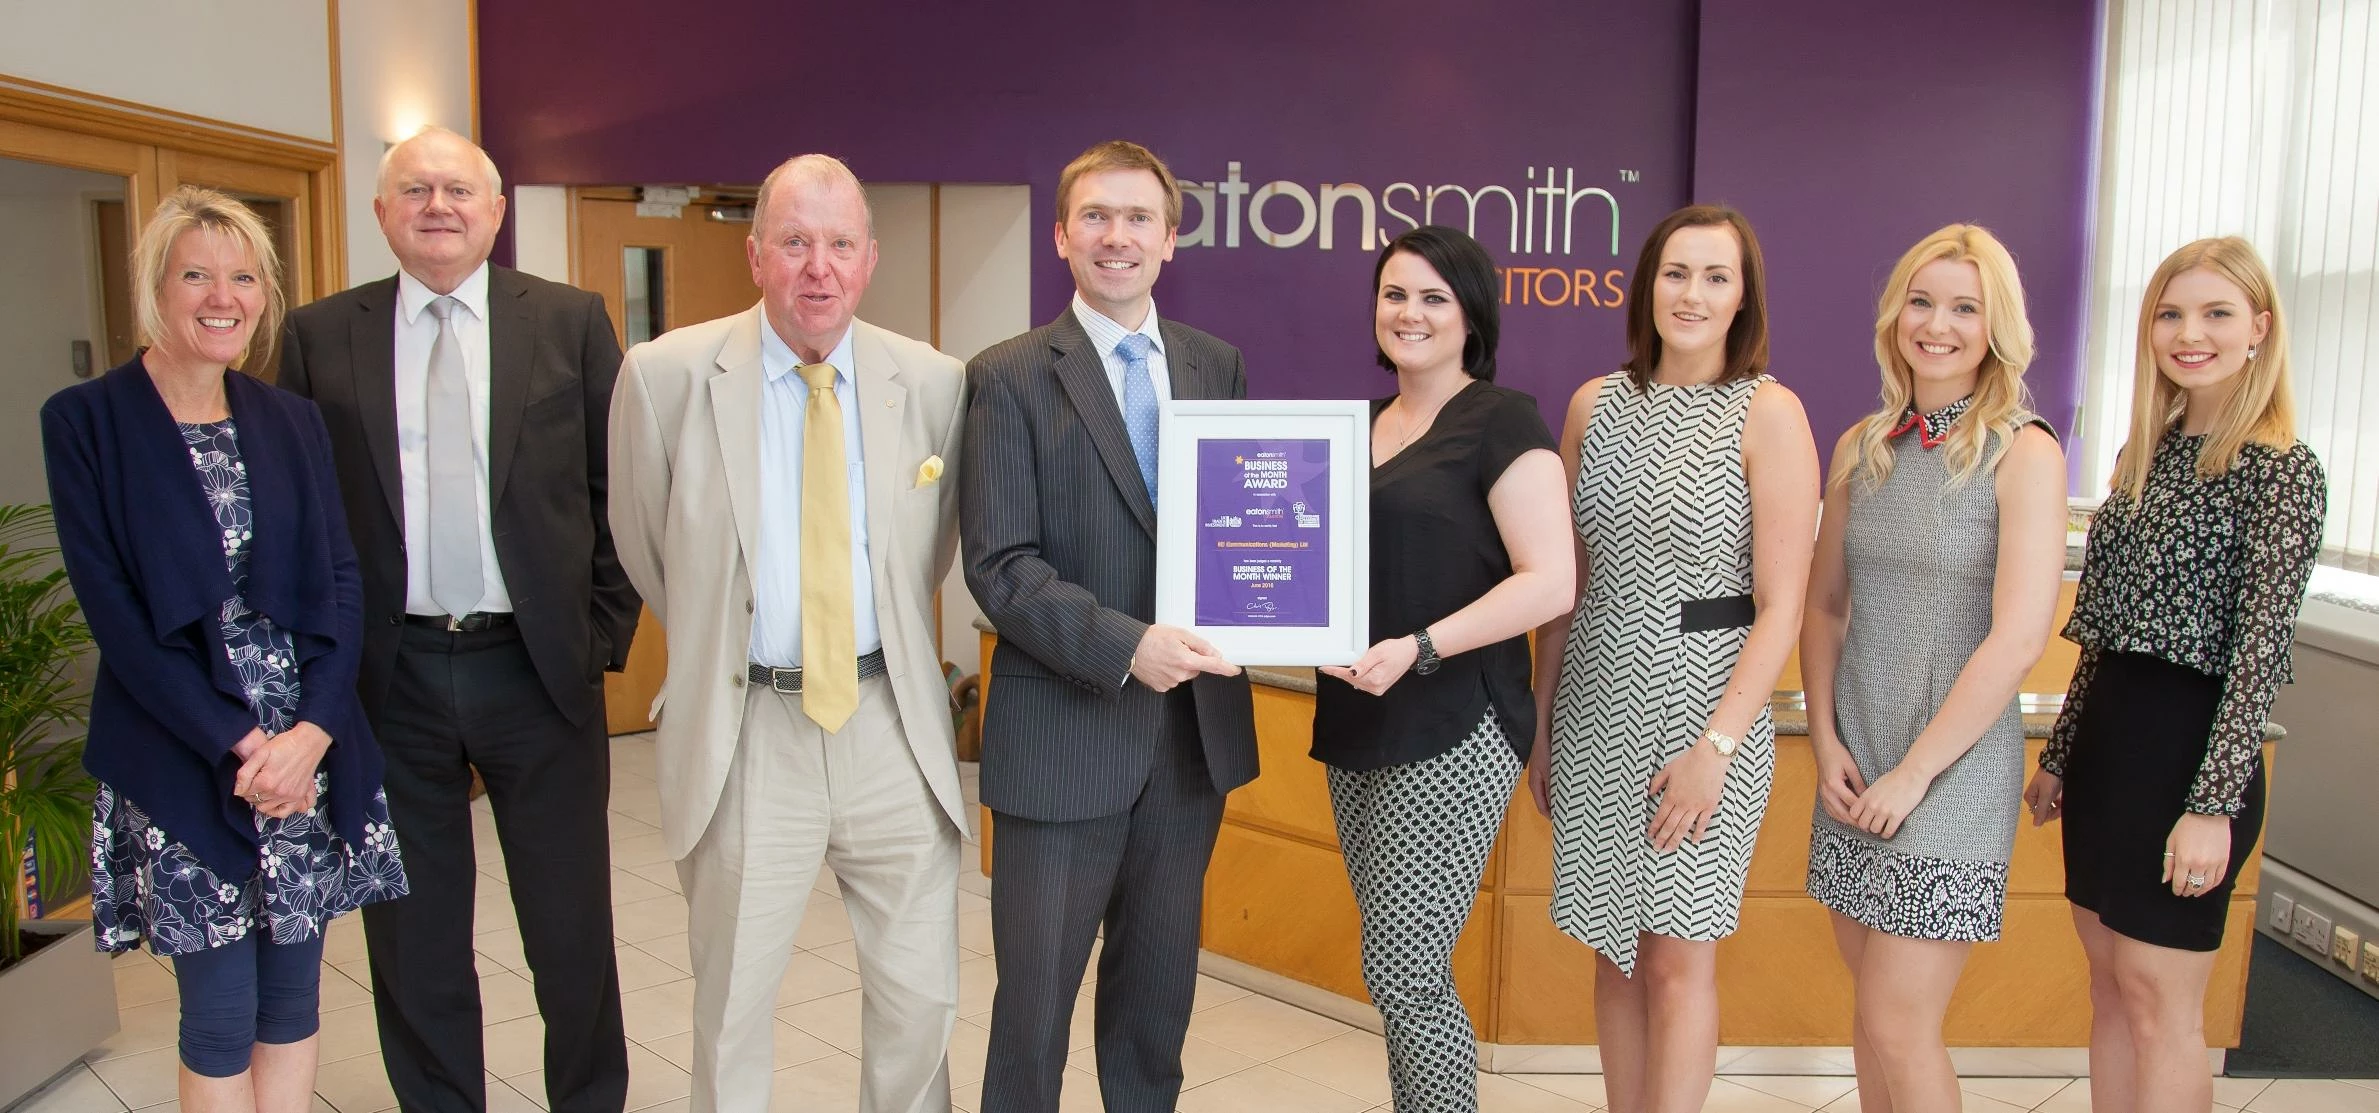 KC Communications Founder & Managing Director being presented with the Eaton Smith Business of the M